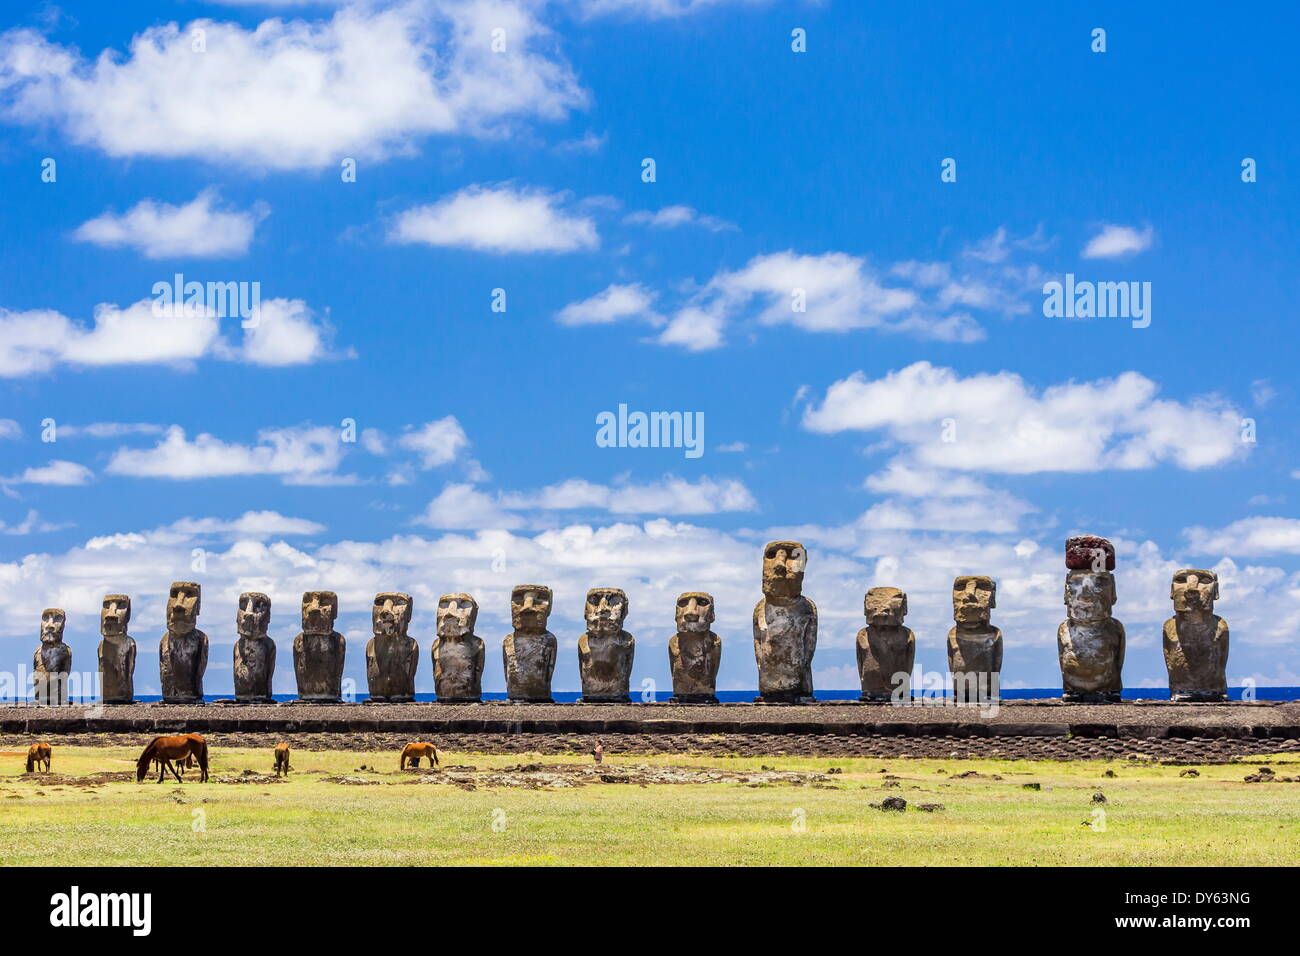 Horses grazing at the restored ceremonial site of Ahu Tongariki on Easter Island (Isla de Pascua) (Rapa Nui), UNESCO Site, Chile Stock Photo